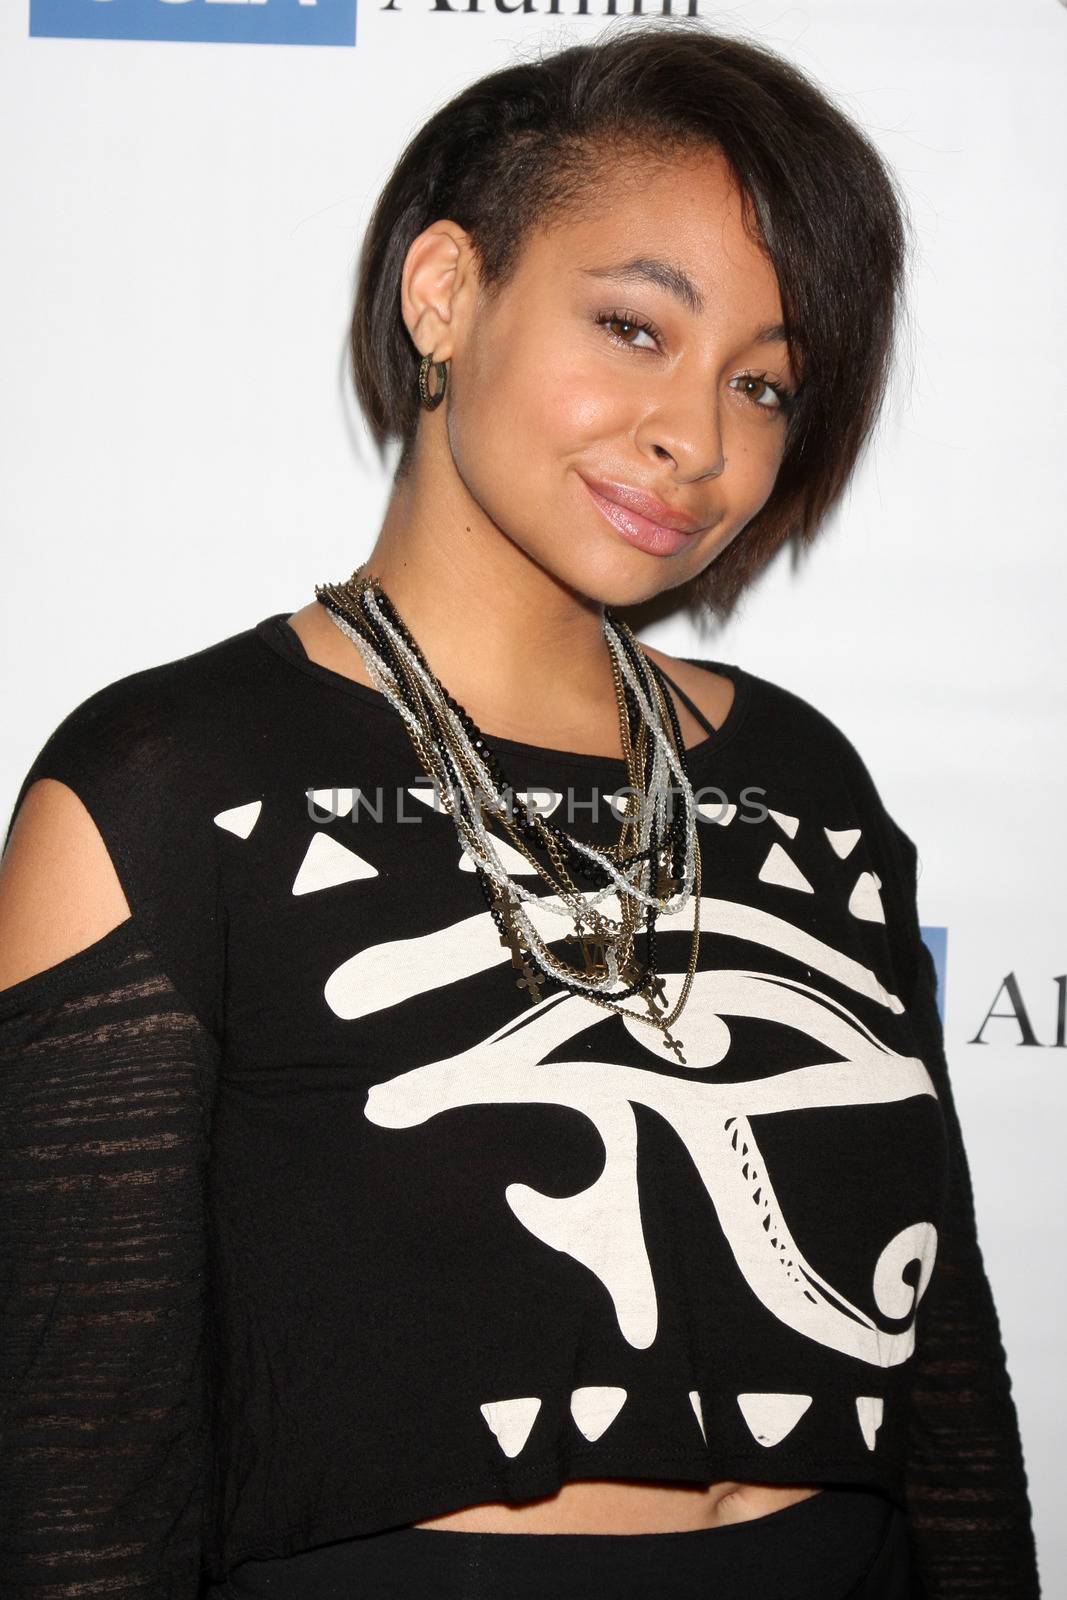 LOS ANGELES - MAY 16: Raven-Symone at the UCLA's Spring Sing 2014 at Pauley Pavilion UCLA on May 16, 2014 in Westwood, CA/ImageCollect by ImageCollect